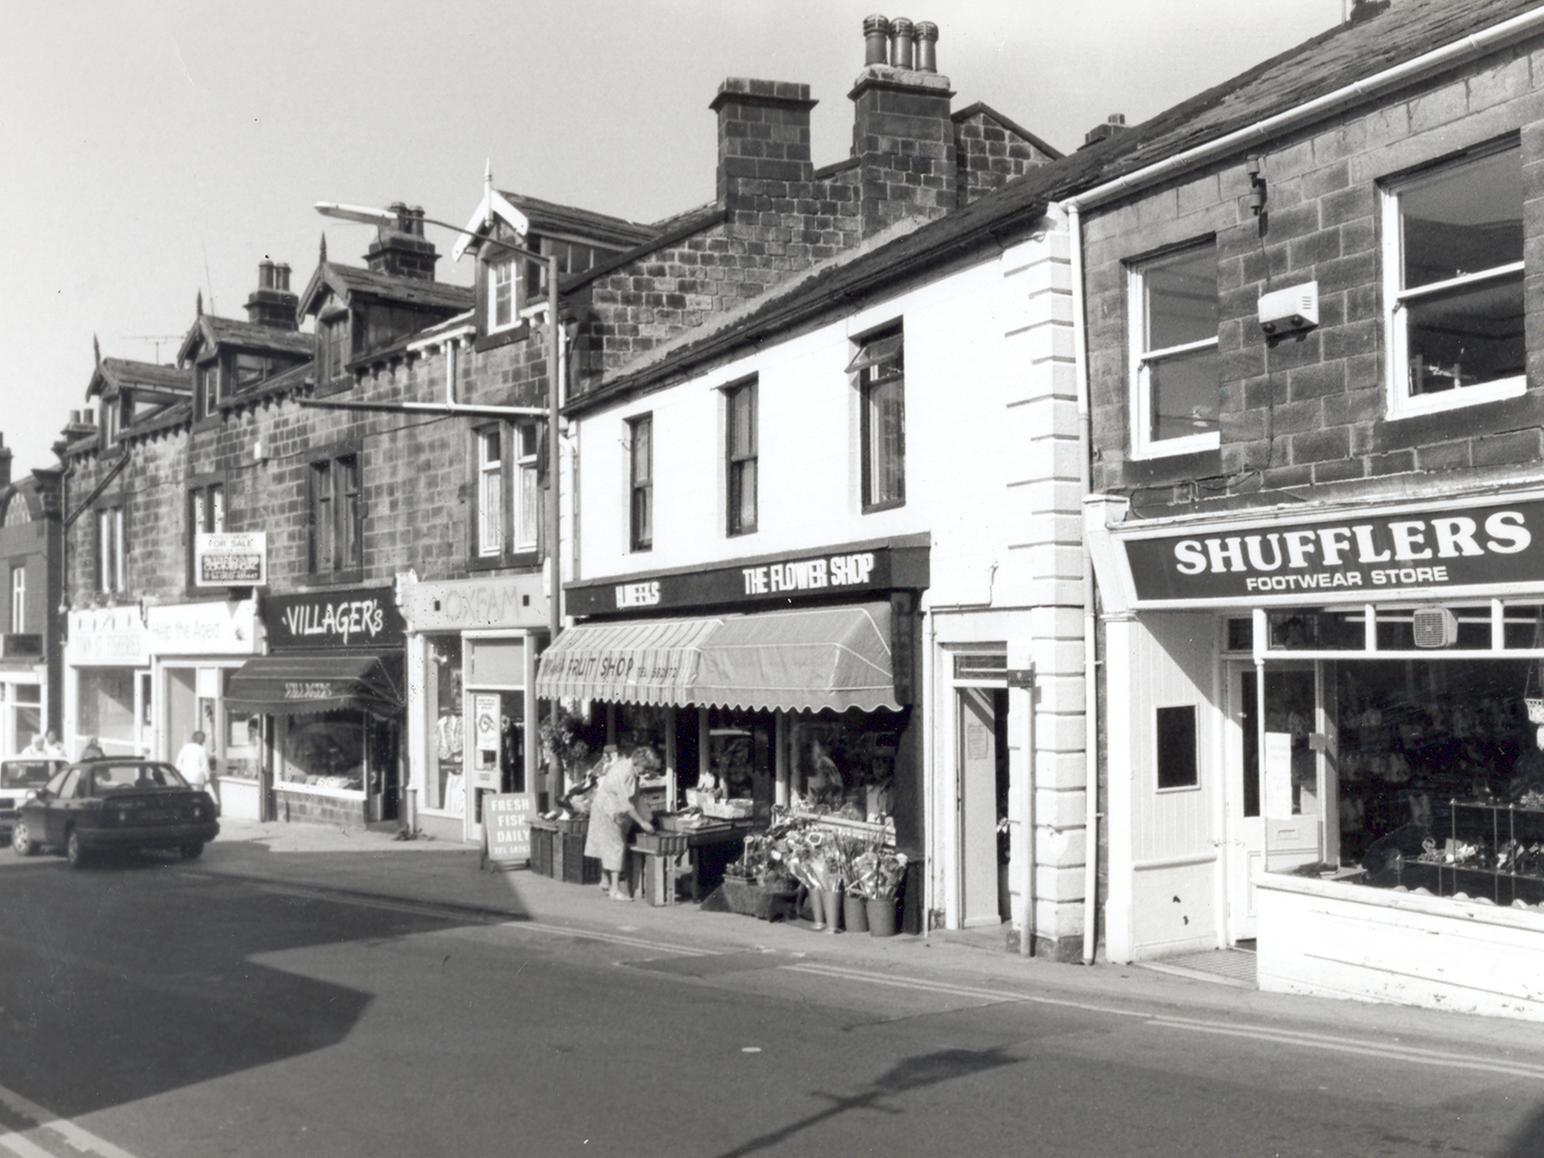 Town Street in Horsforth. How many of these shops are still open?